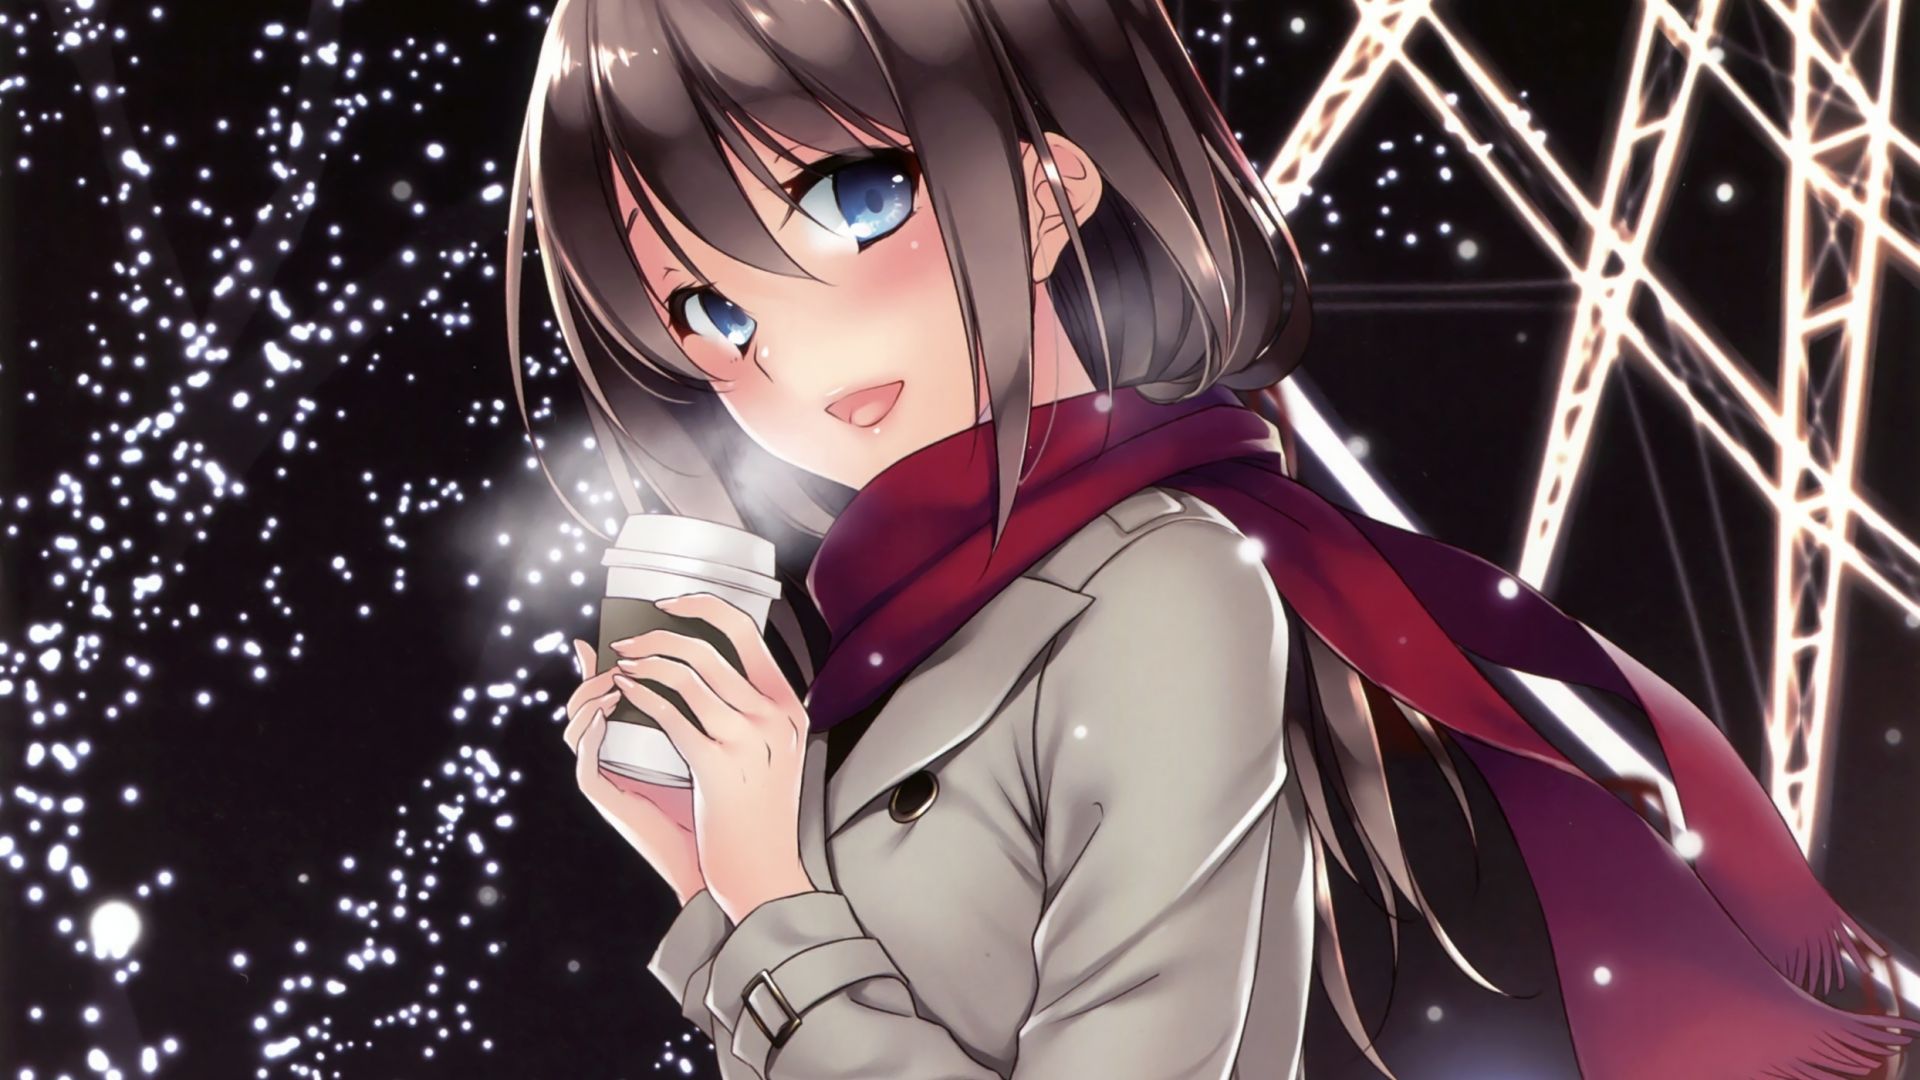 Drink, coffee, anime girl, winter wallpaper, HD image, picture, background, 0a5b2b